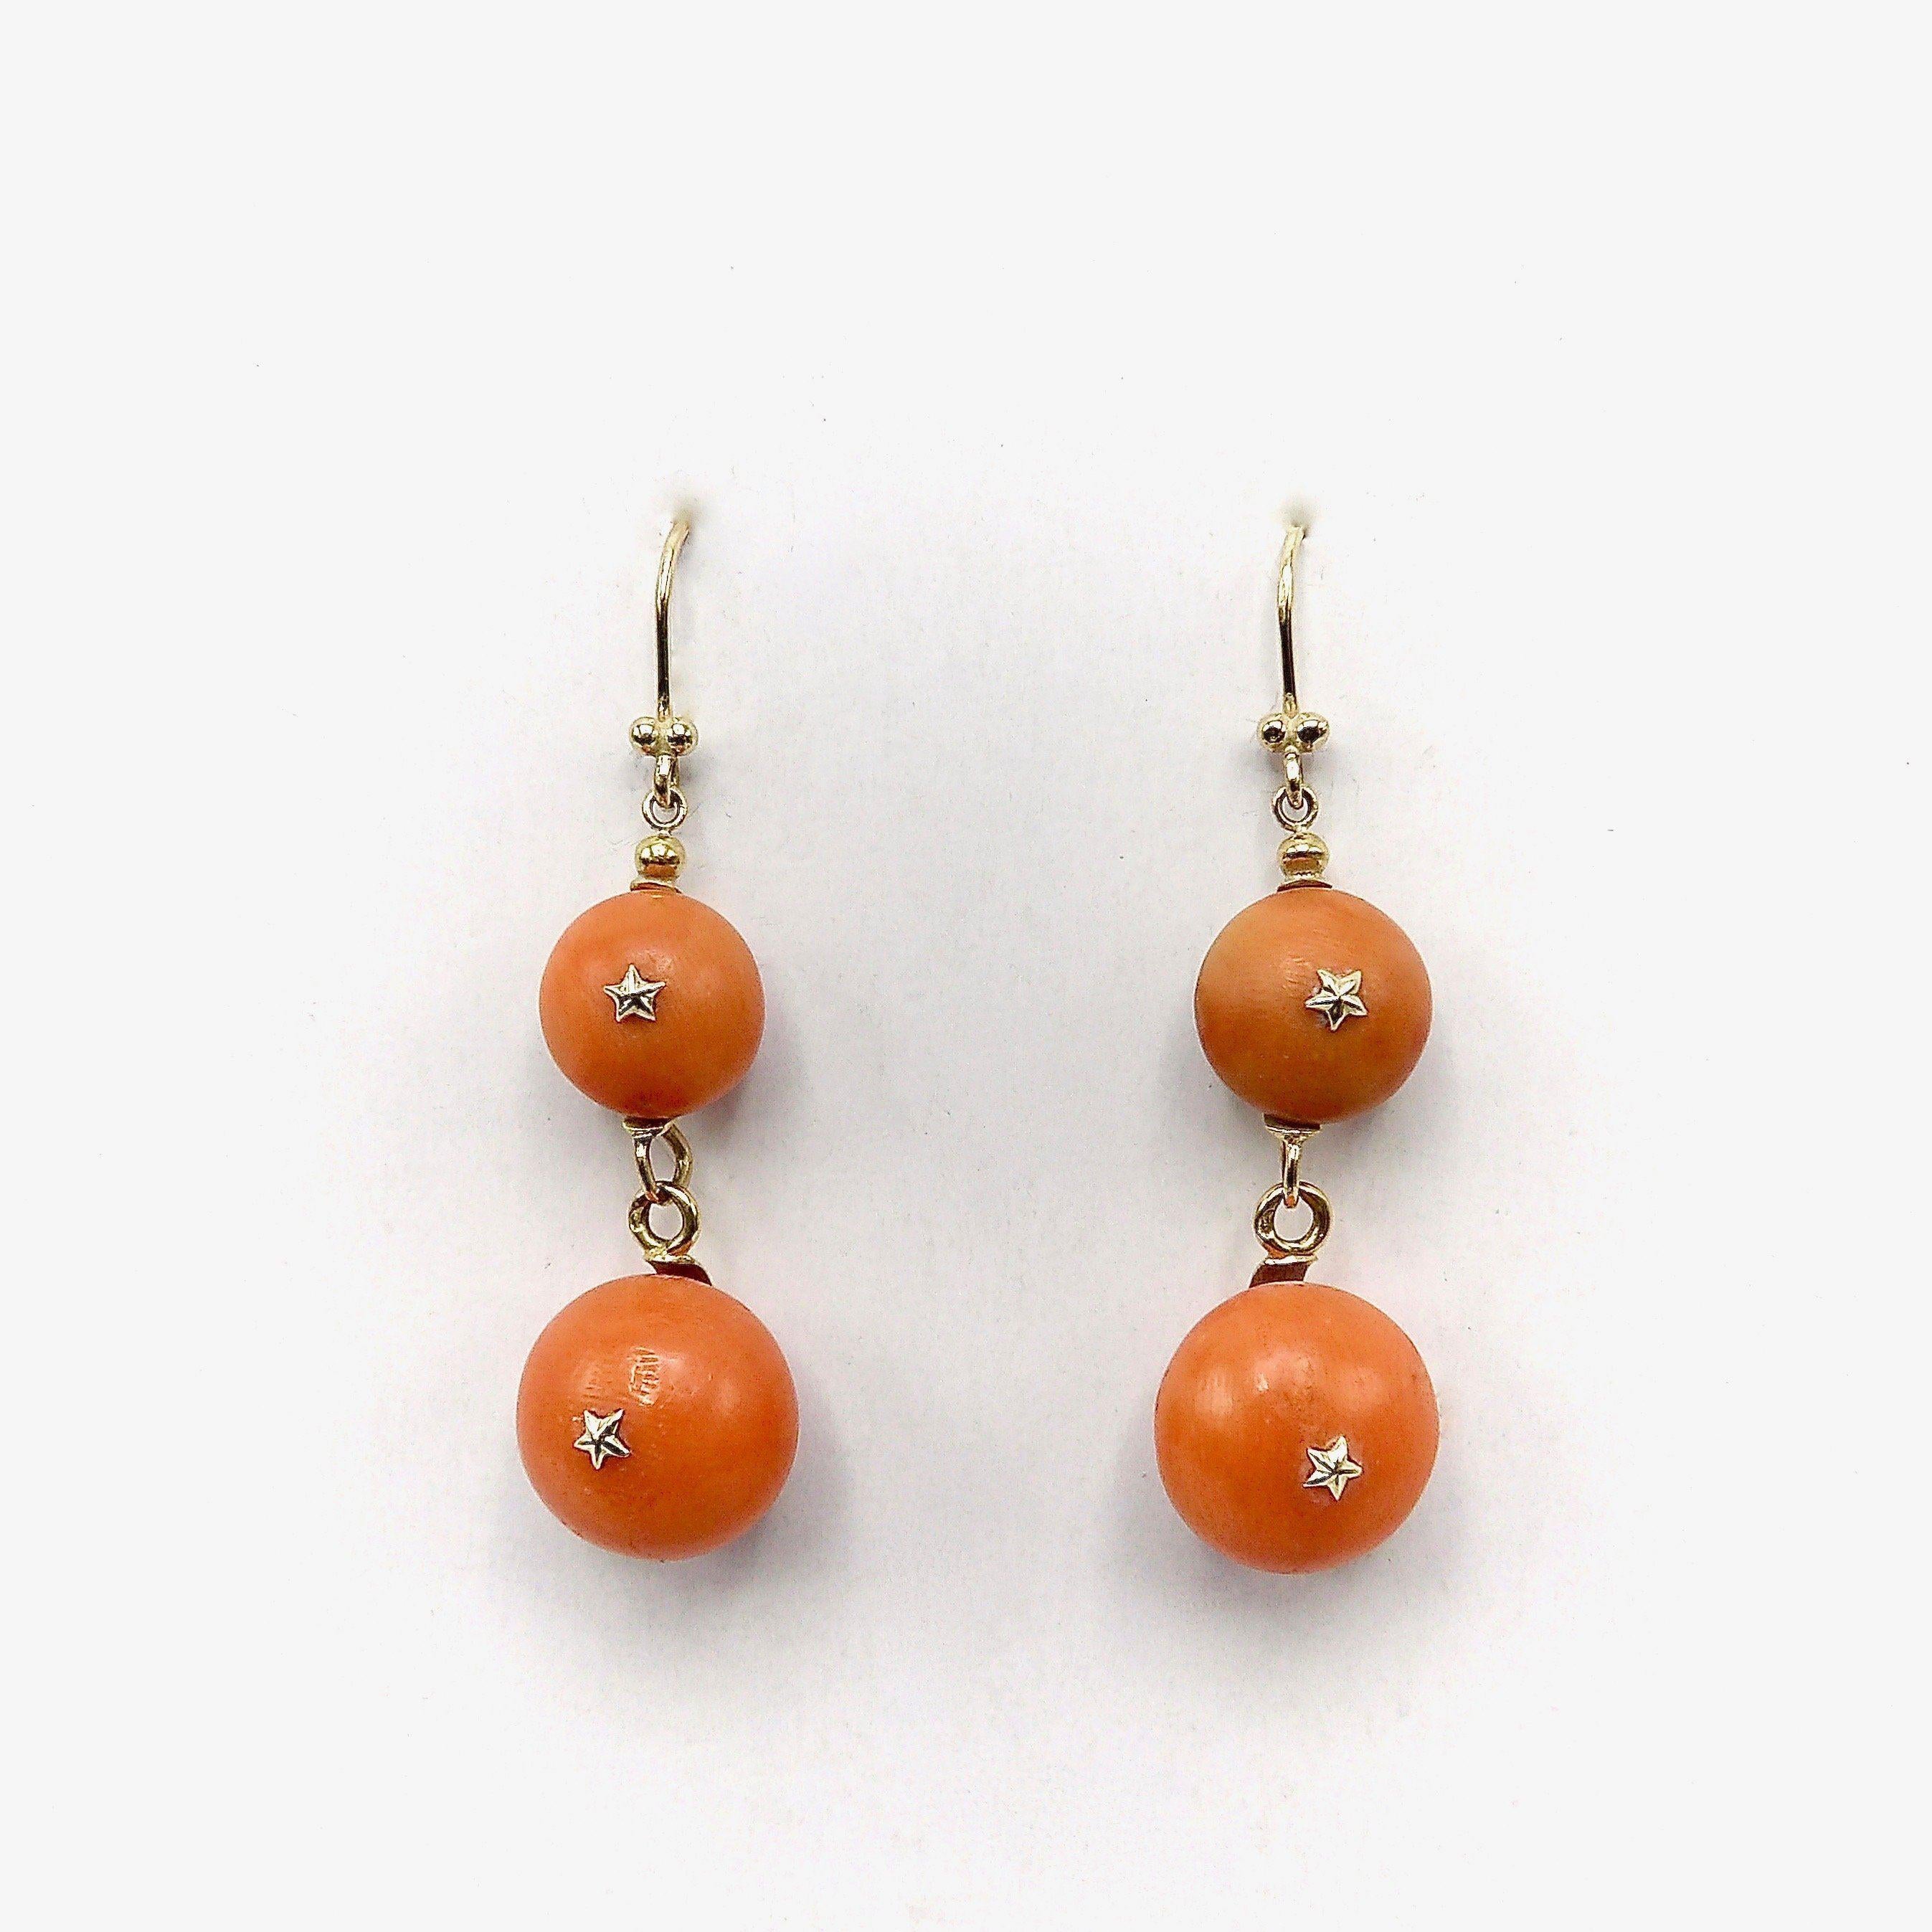 Victorian 18K Gold French Coral Ball Dangle Earrings, 1870
 
These beautiful French coral ball dangle earrings remind one of a summers day. Two graduated slightly flattened balls dangle from a Euro wire like ripe melon balls luscious and sweet. The